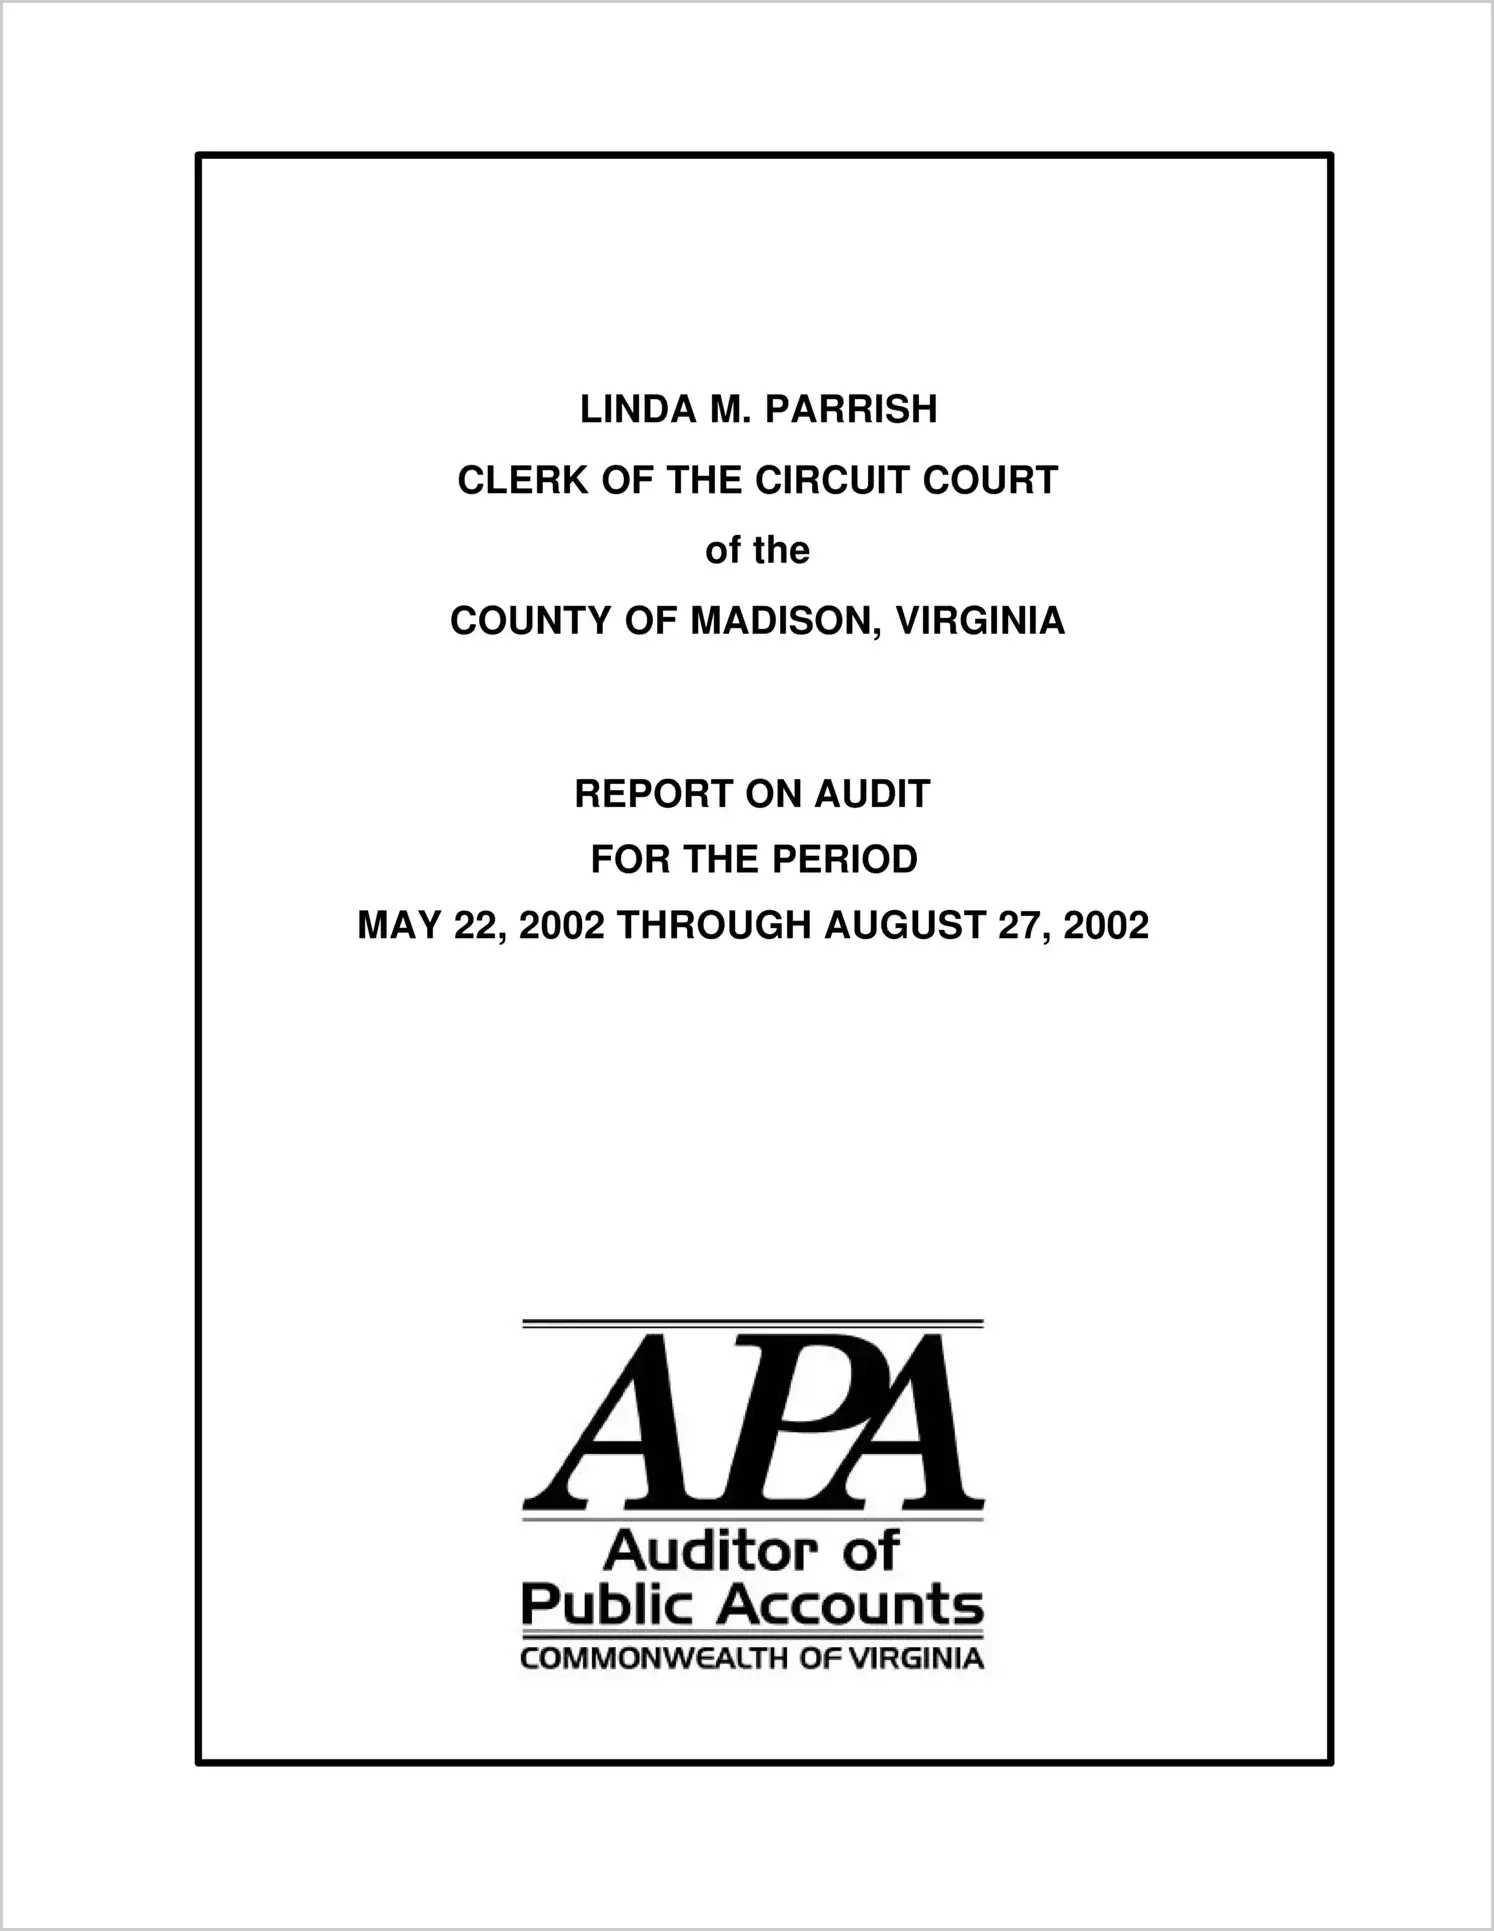 Clerk of the Circuit Court for the County of Madison for the period May 22, 2002 through August 27, 2002